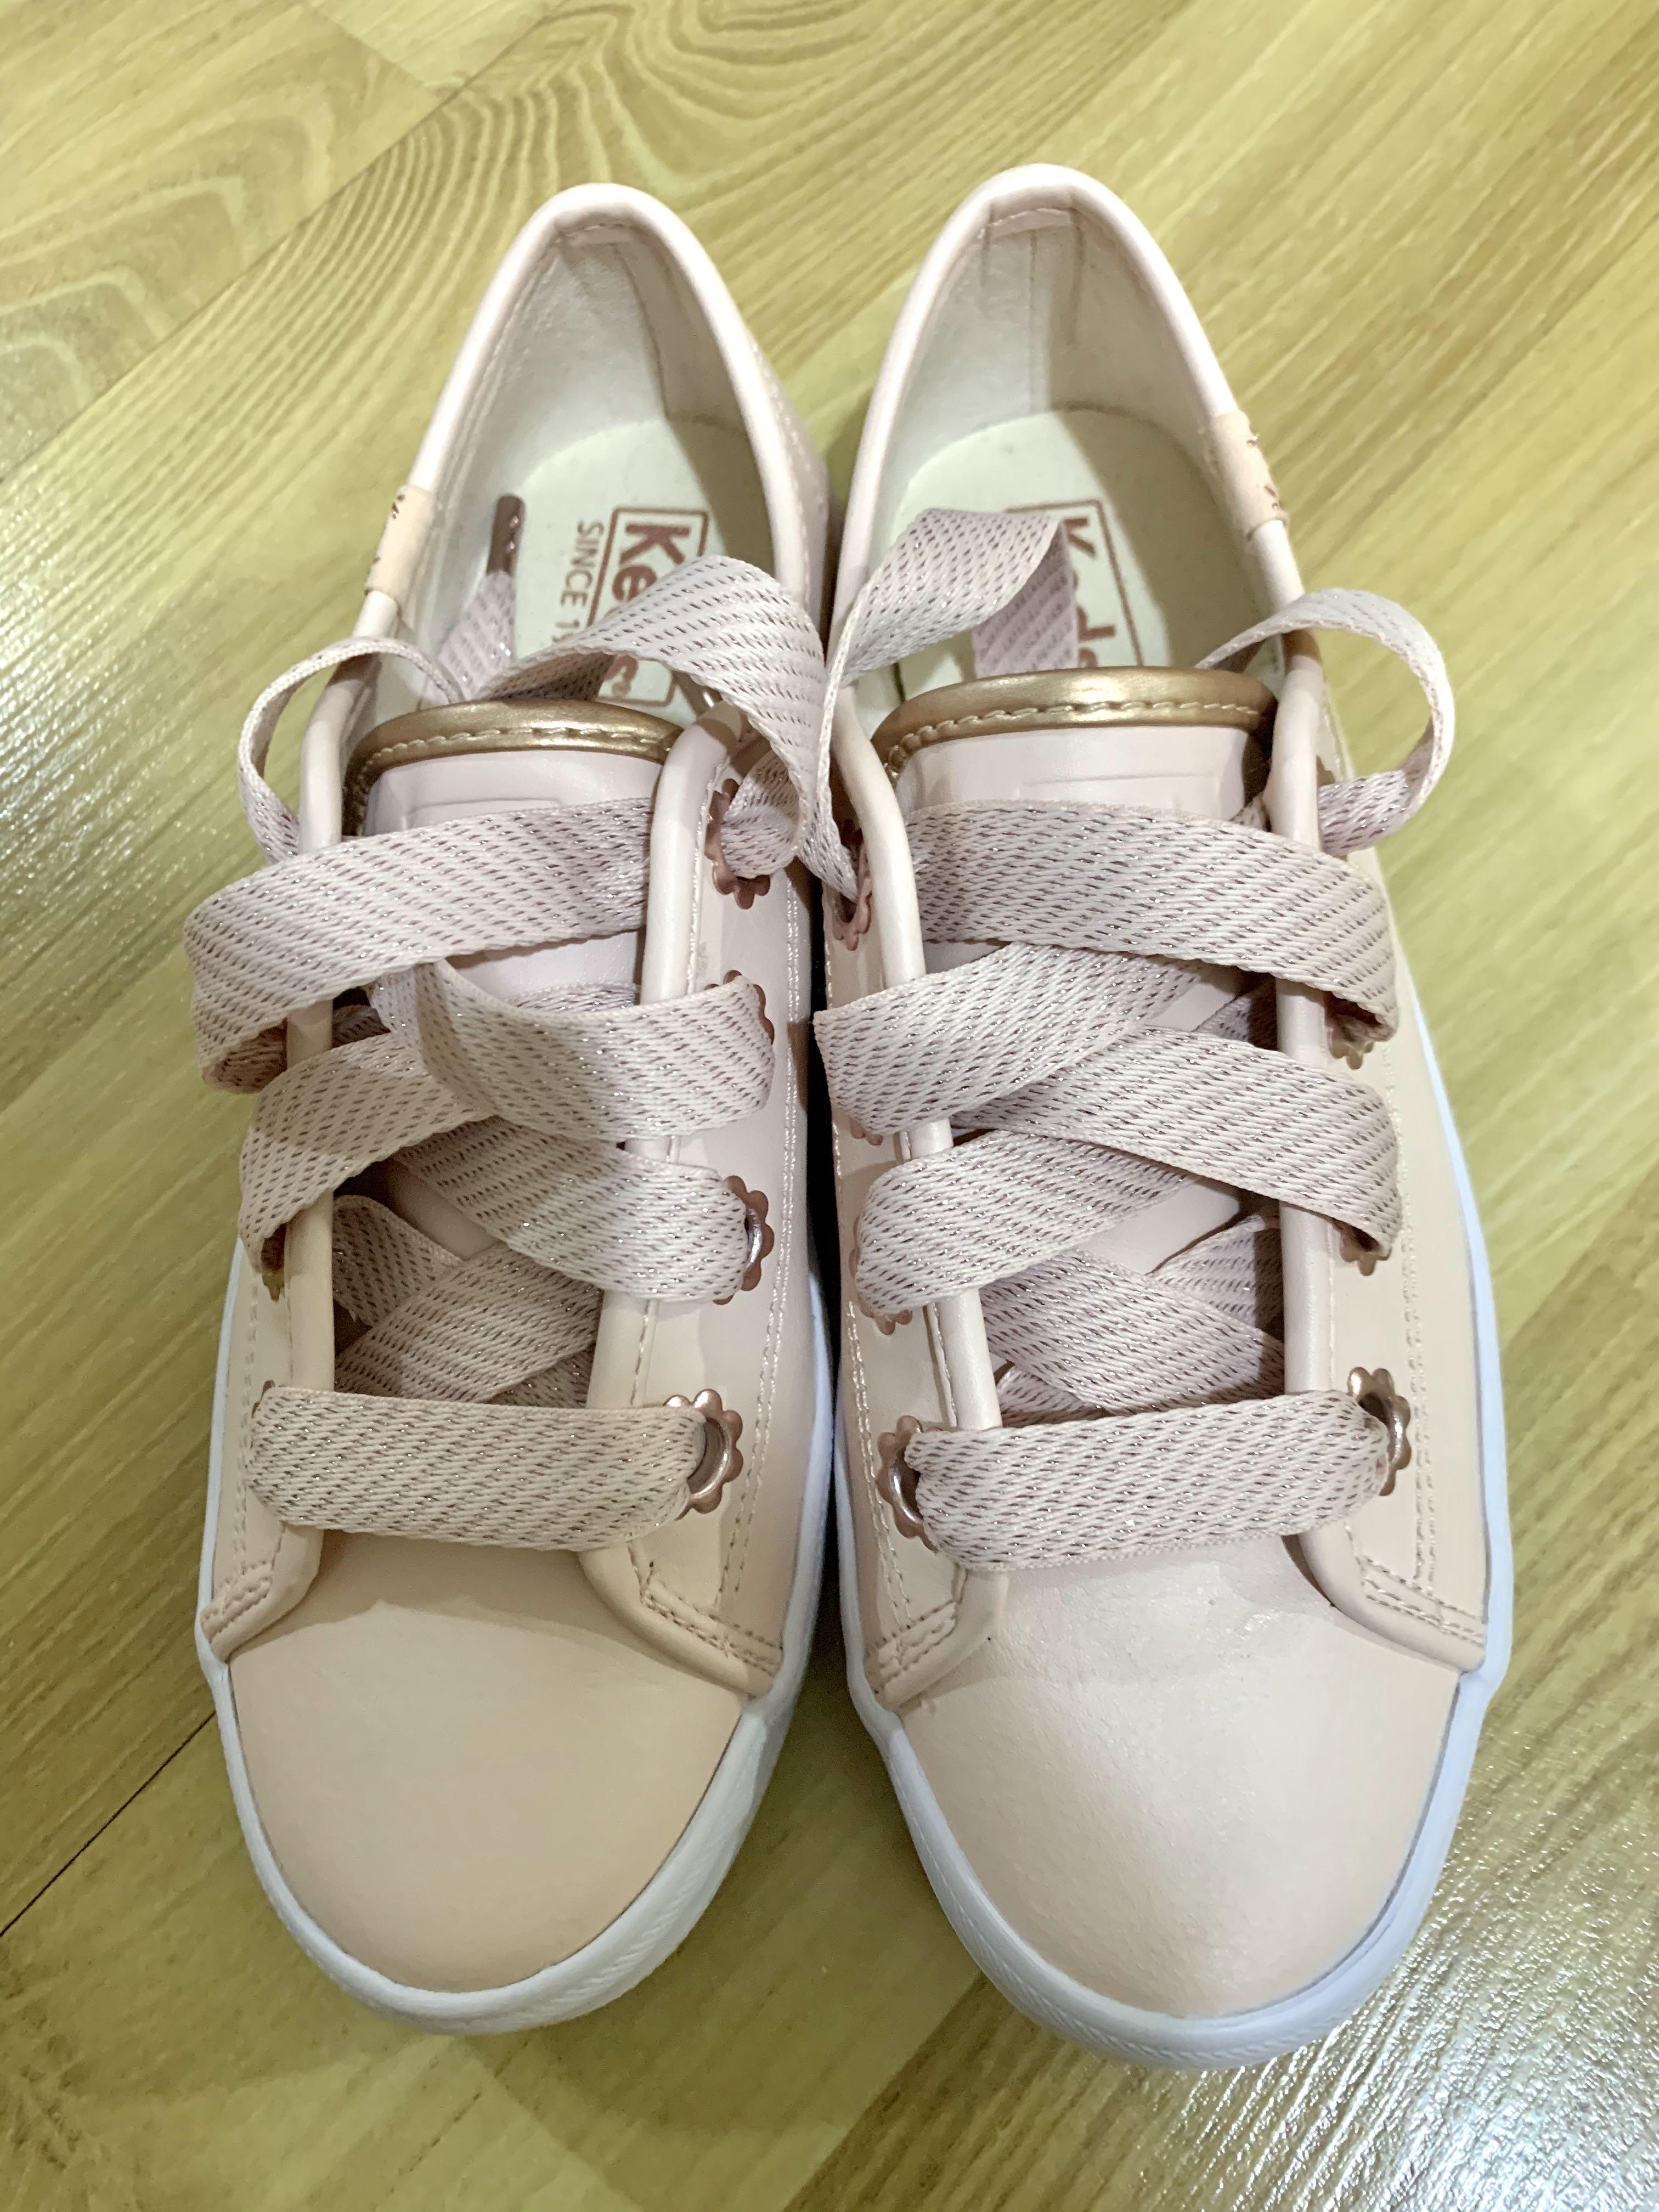 KEDS - Pink leather sneakers, Women's 